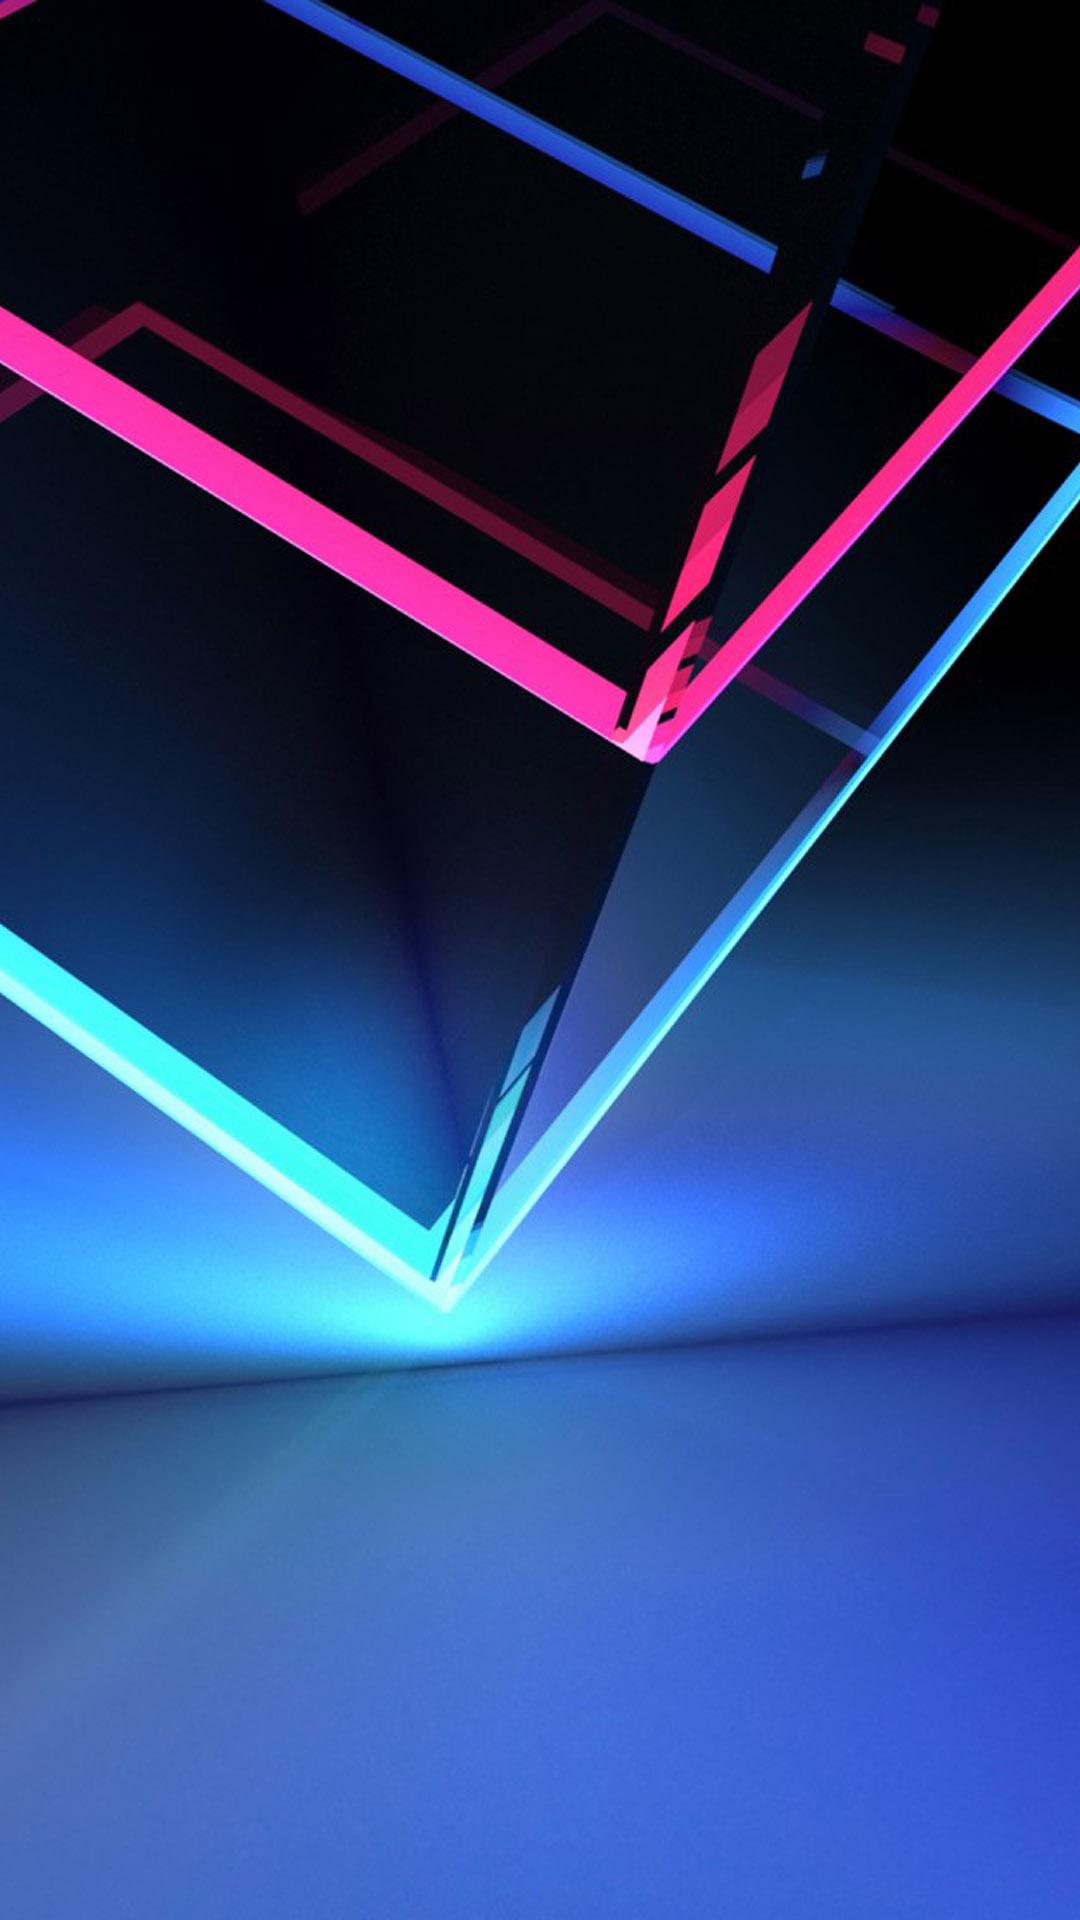 Download 3D Cube Neon Red Blue Light Free Pure 4K Ultra HD